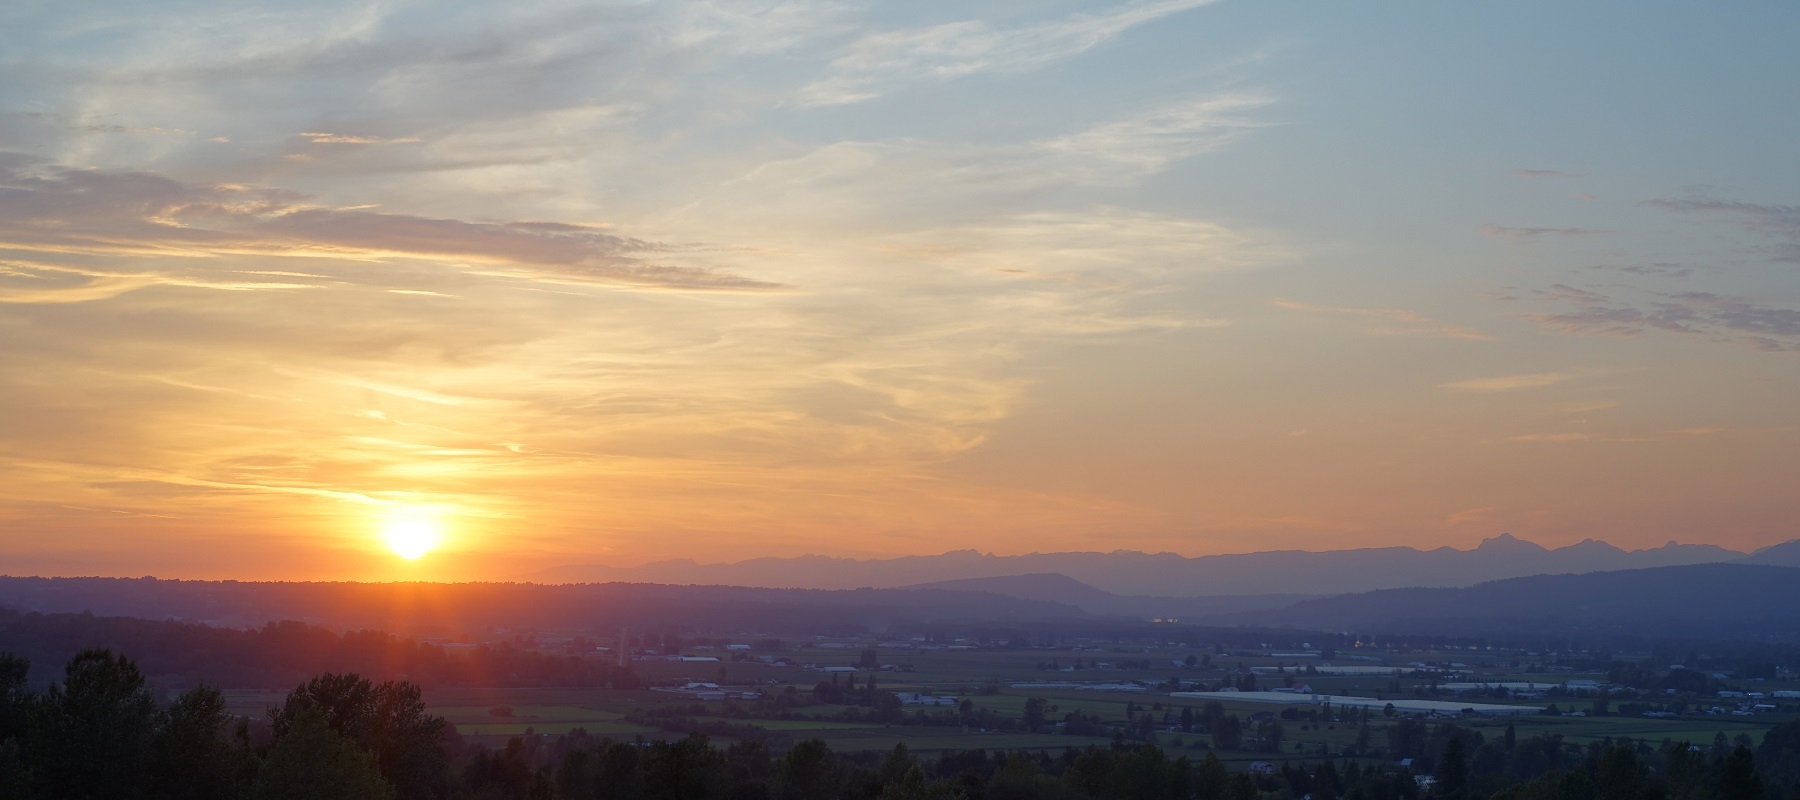 Sunset over the city of Abbotsford